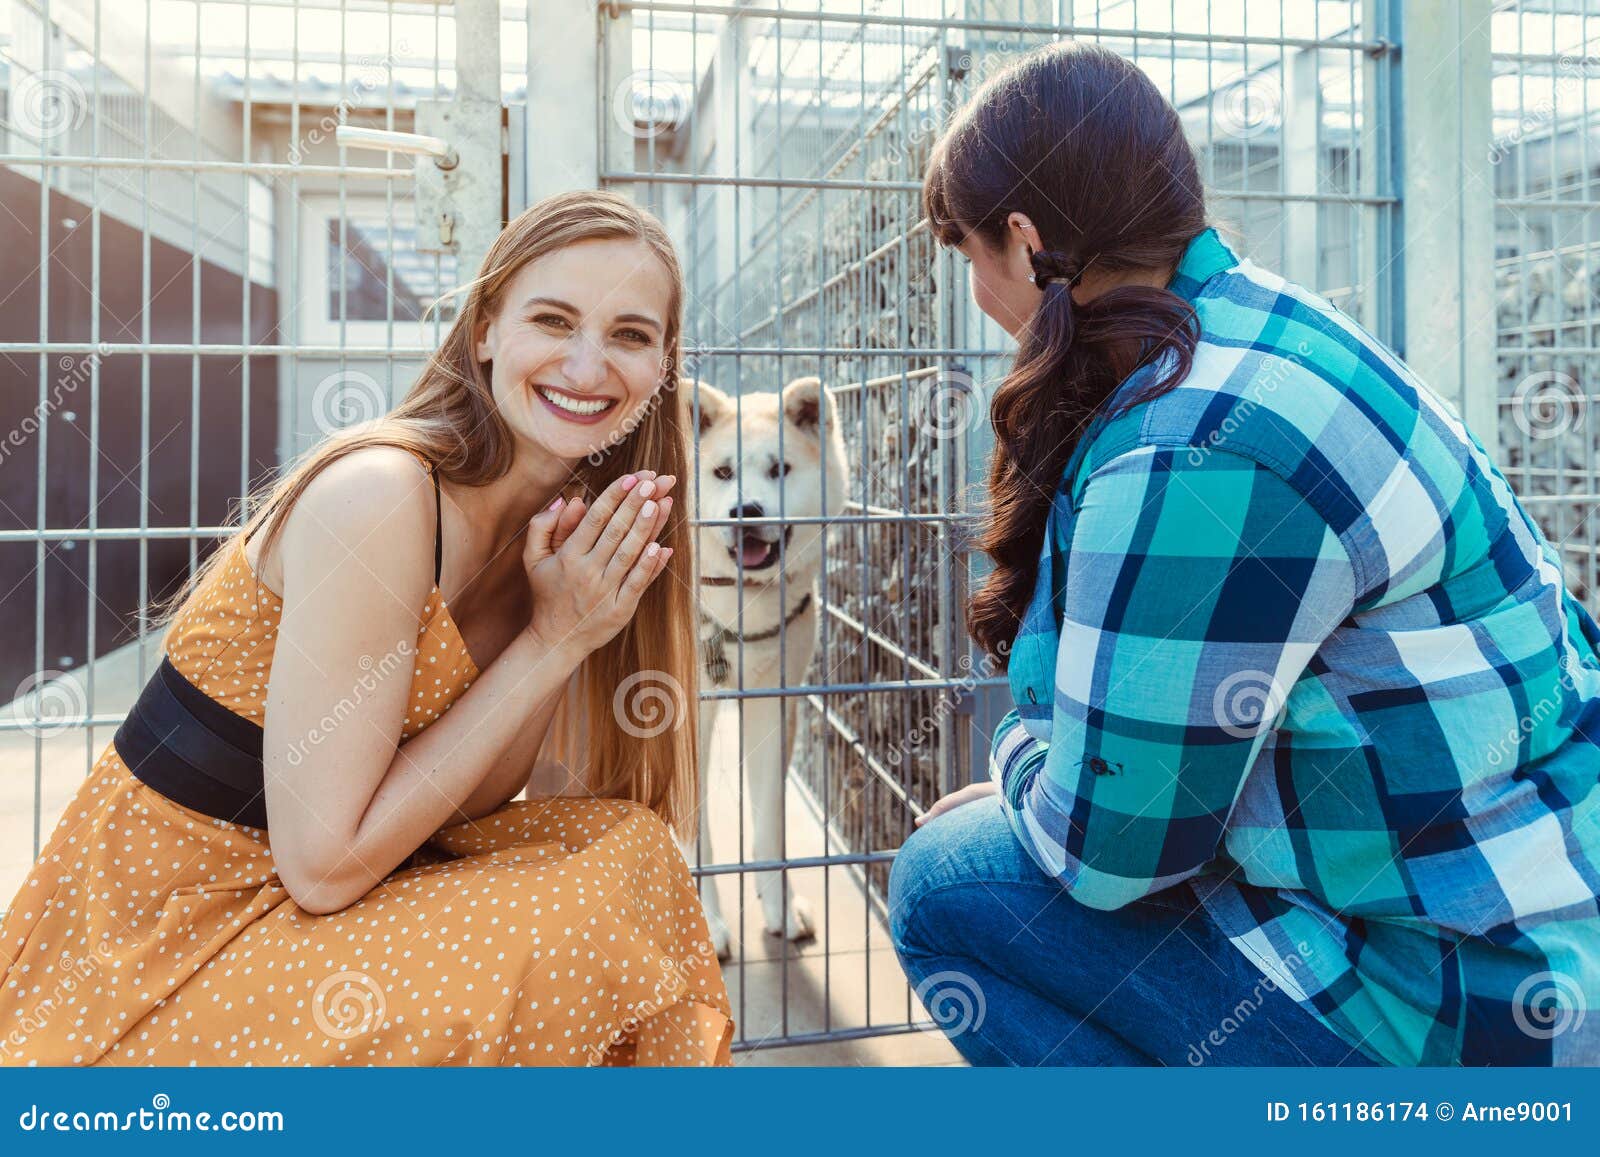 woman adopting a dog in the animal shelter, eagerly waiting